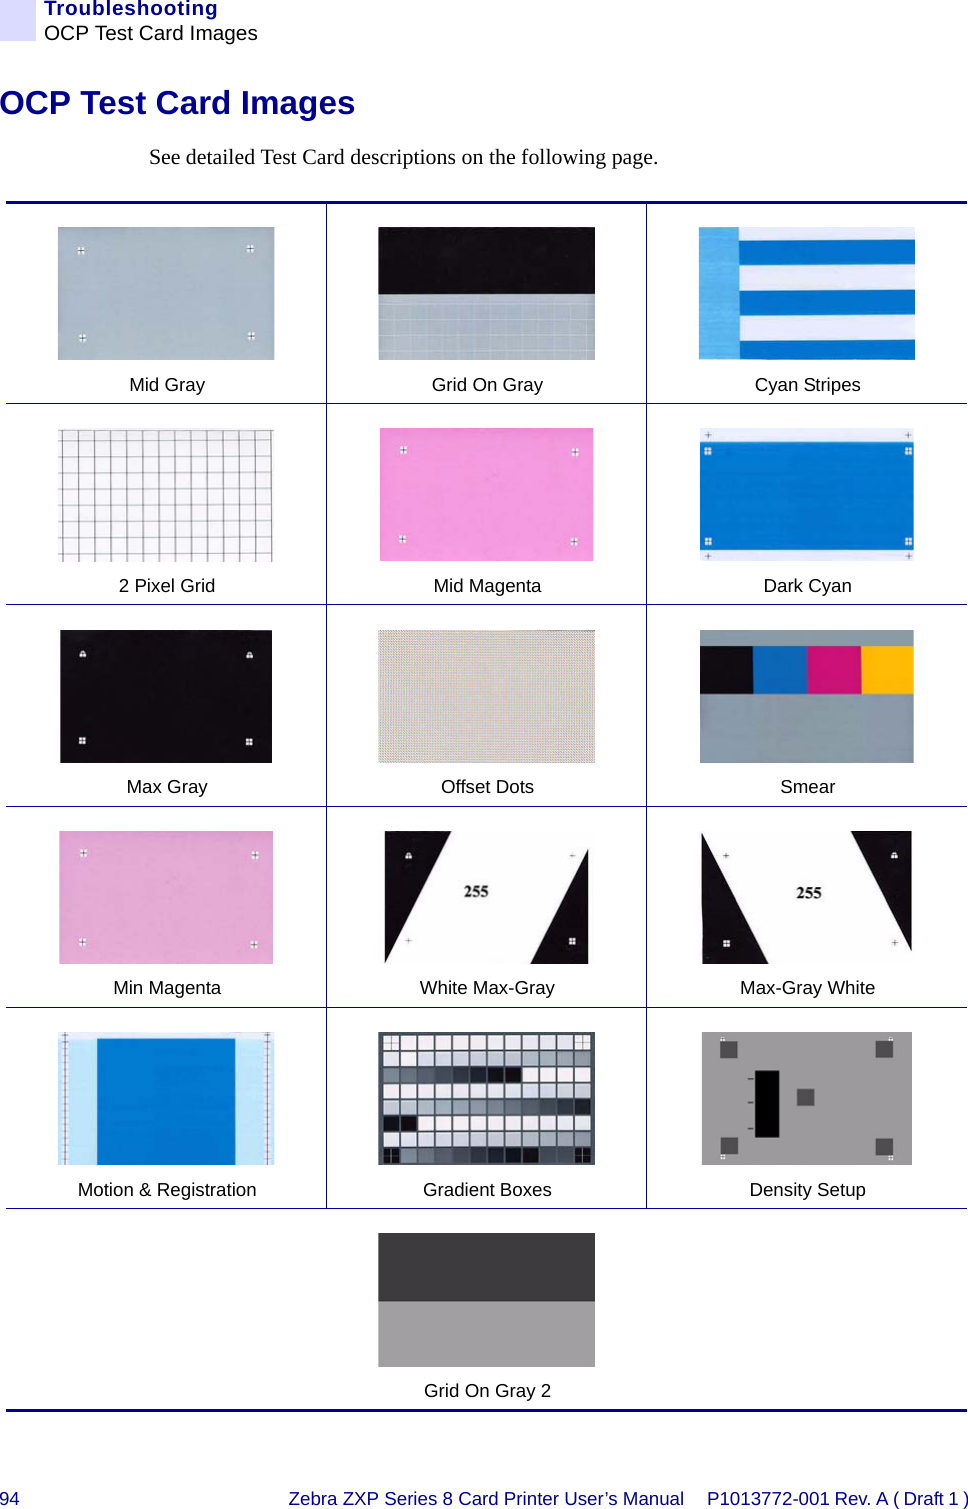 94 Zebra ZXP Series 8 Card Printer User’s Manual P1013772-001 Rev. A ( Draft 1 ) TroubleshootingOCP Test Card ImagesOCP Test Card ImagesSee detailed Test Card descriptions on the following page.Mid Gray Grid On Gray Cyan Stripes2 Pixel Grid Mid Magenta Dark CyanMax Gray Offset Dots SmearMin Magenta White Max-Gray Max-Gray WhiteMotion &amp; Registration Gradient Boxes Density SetupGrid On Gray 2